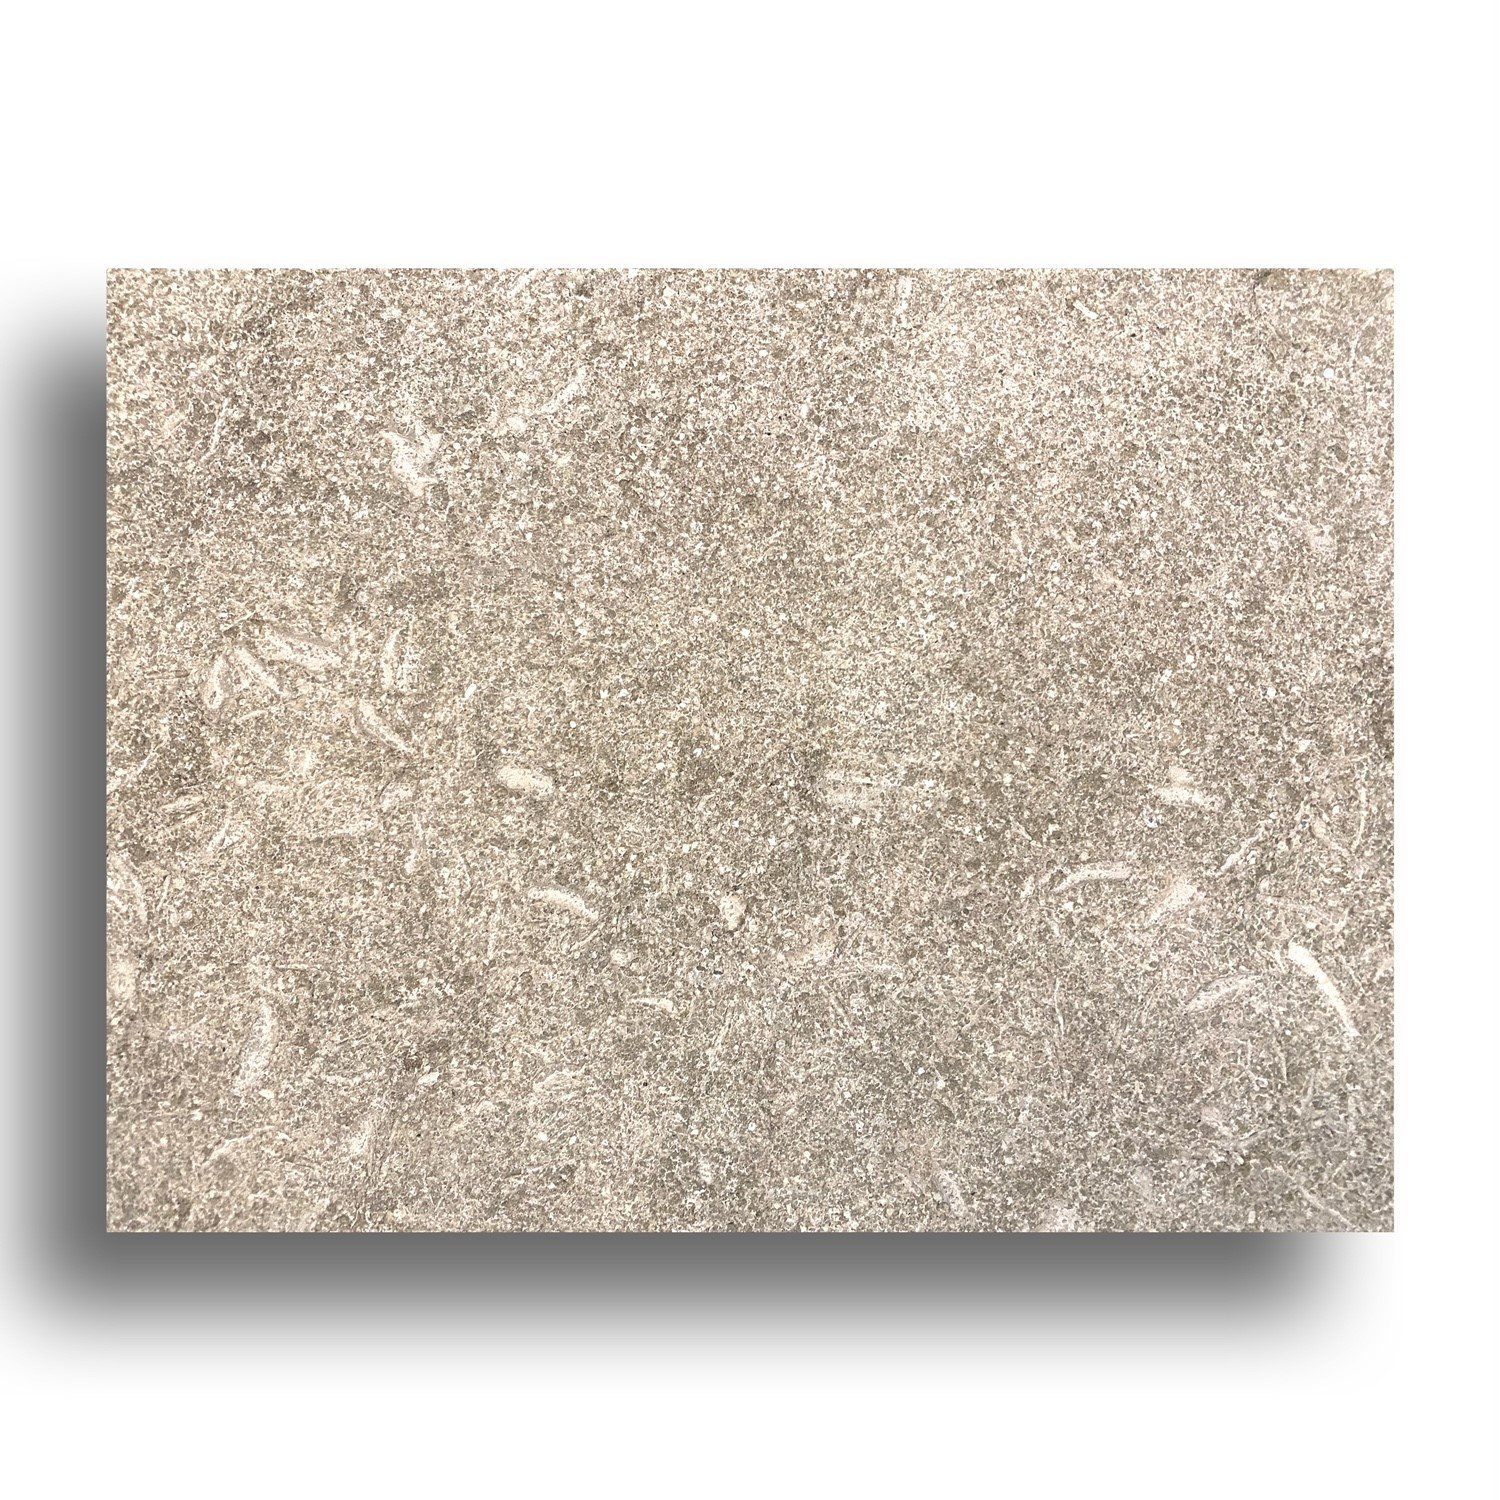  plonc. Seagrass Marble Tile